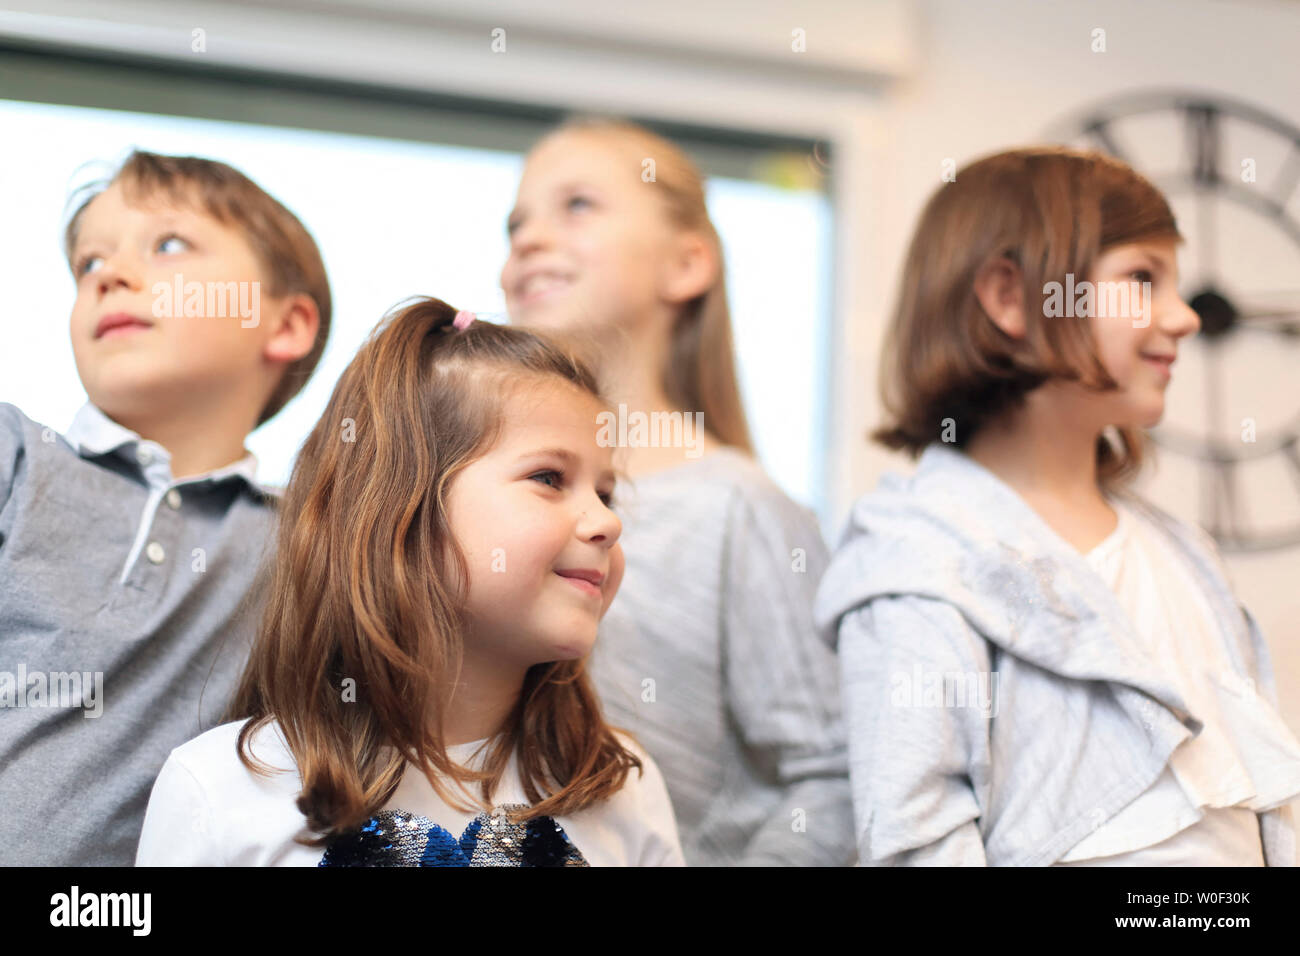 Children looking in different directions Stock Photo